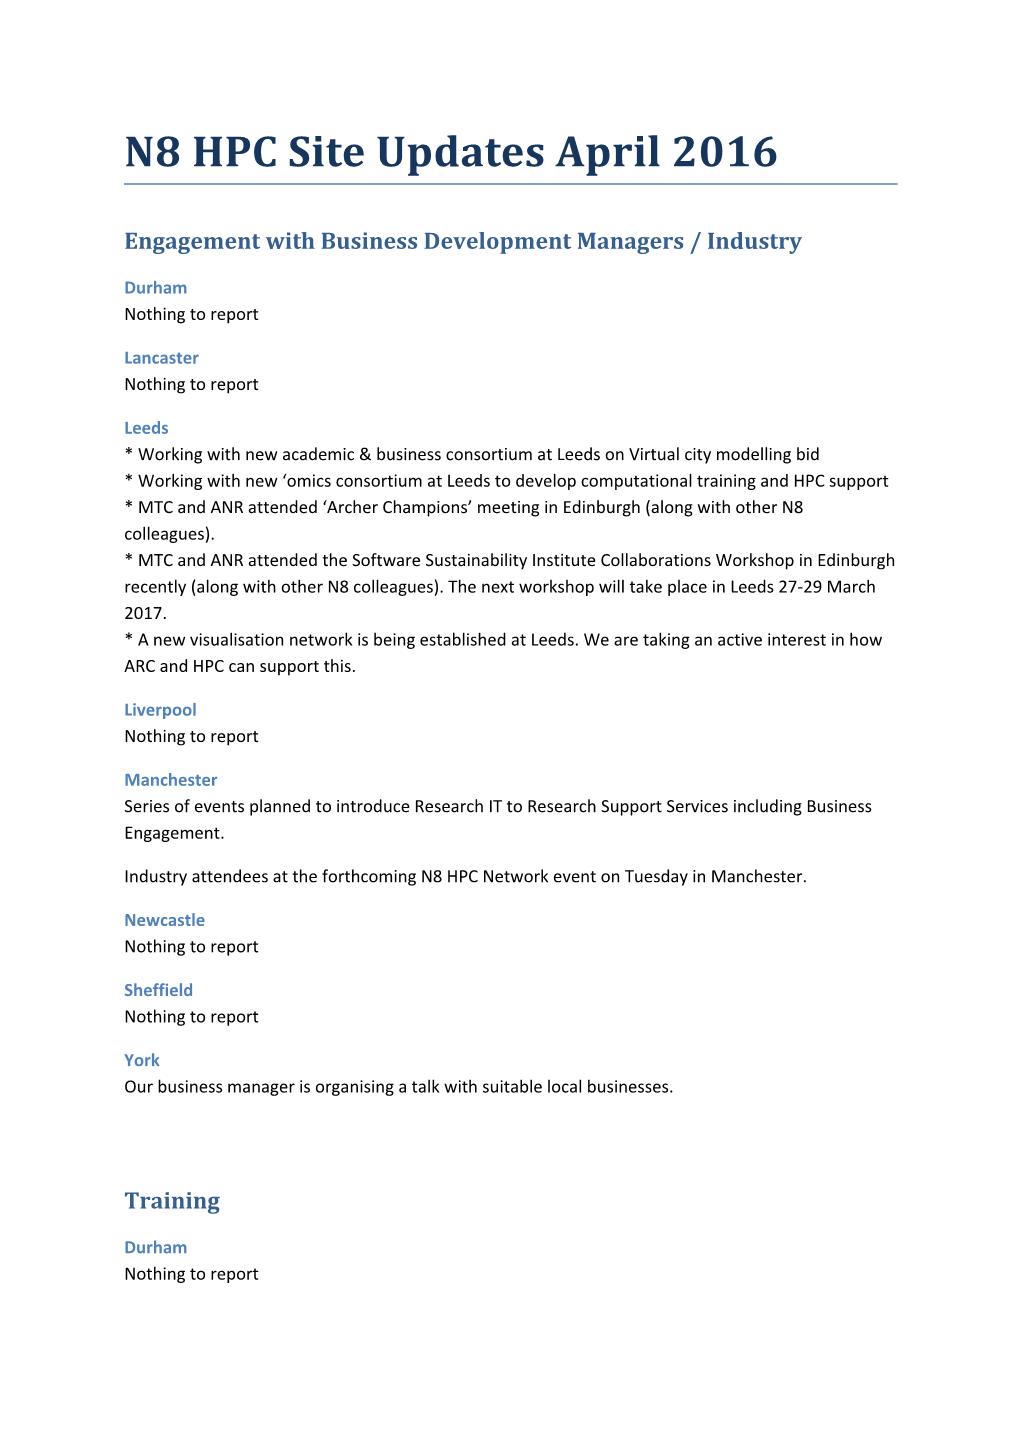 Engagement with Business Development Managers / Industry s1